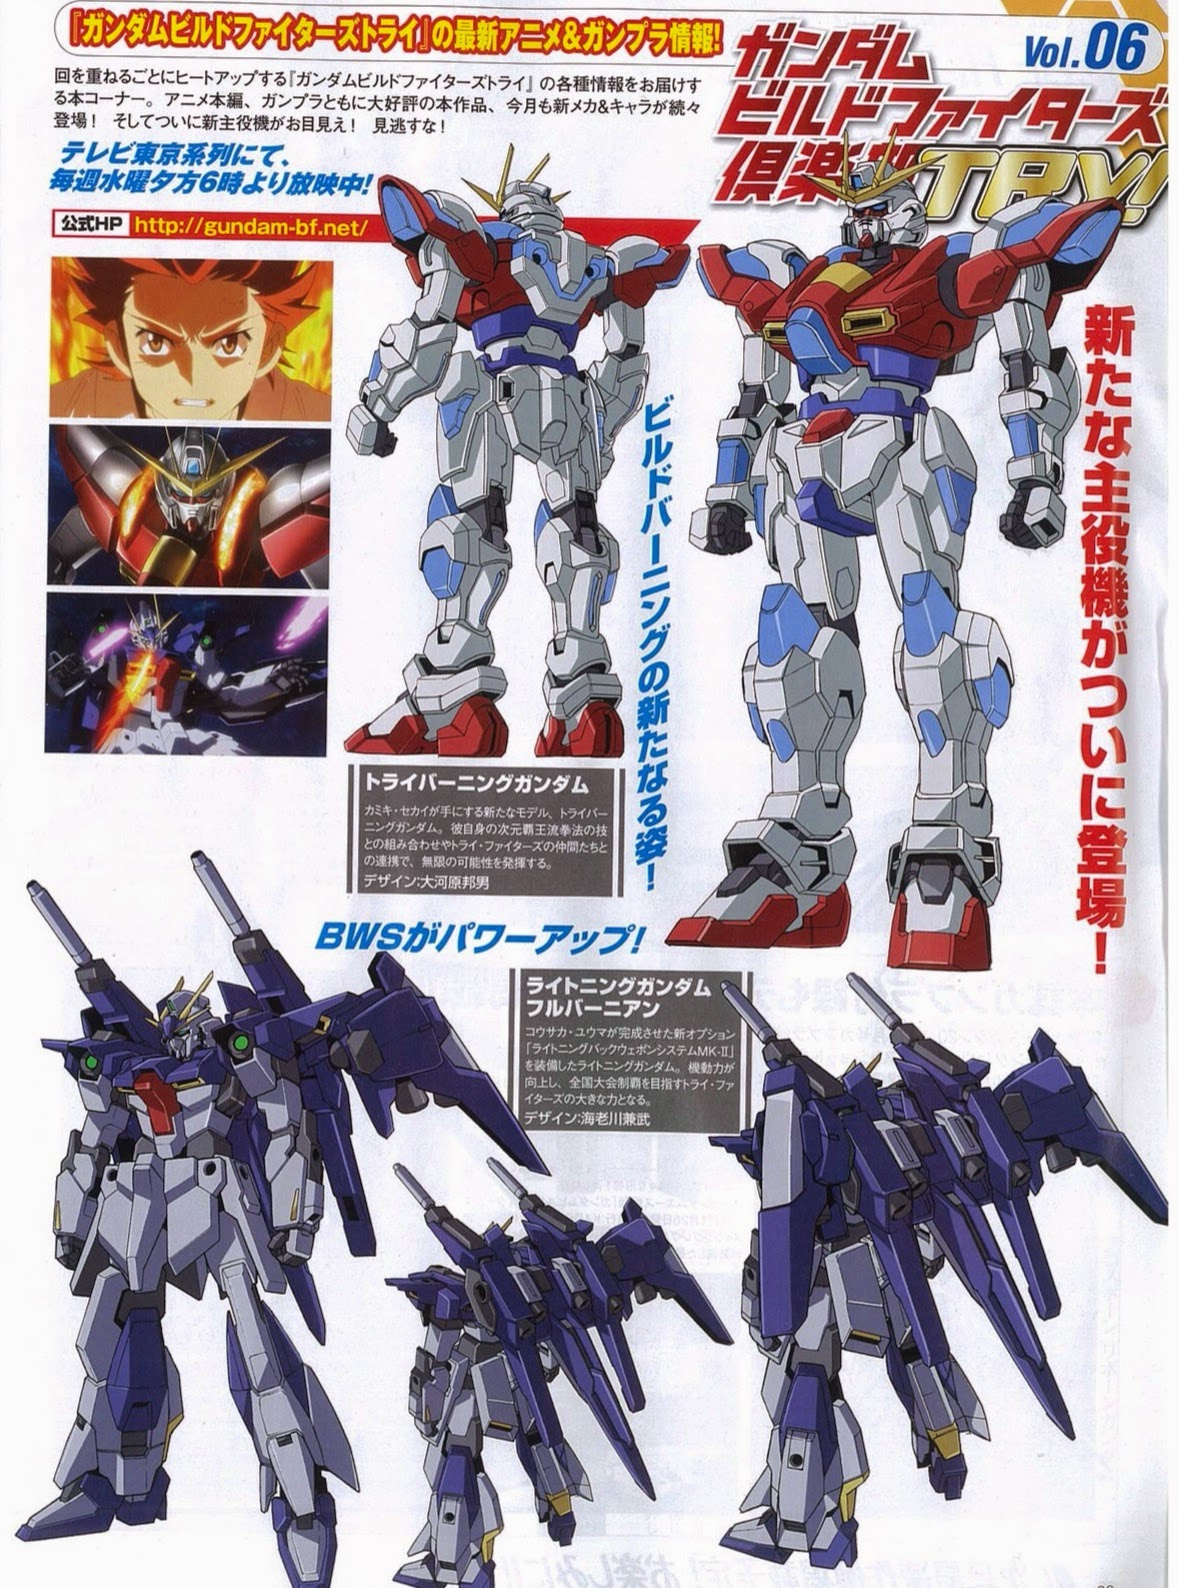 GUNDAM GUY: Gundam Build Fighters Try - New Mobile Suits & Characters